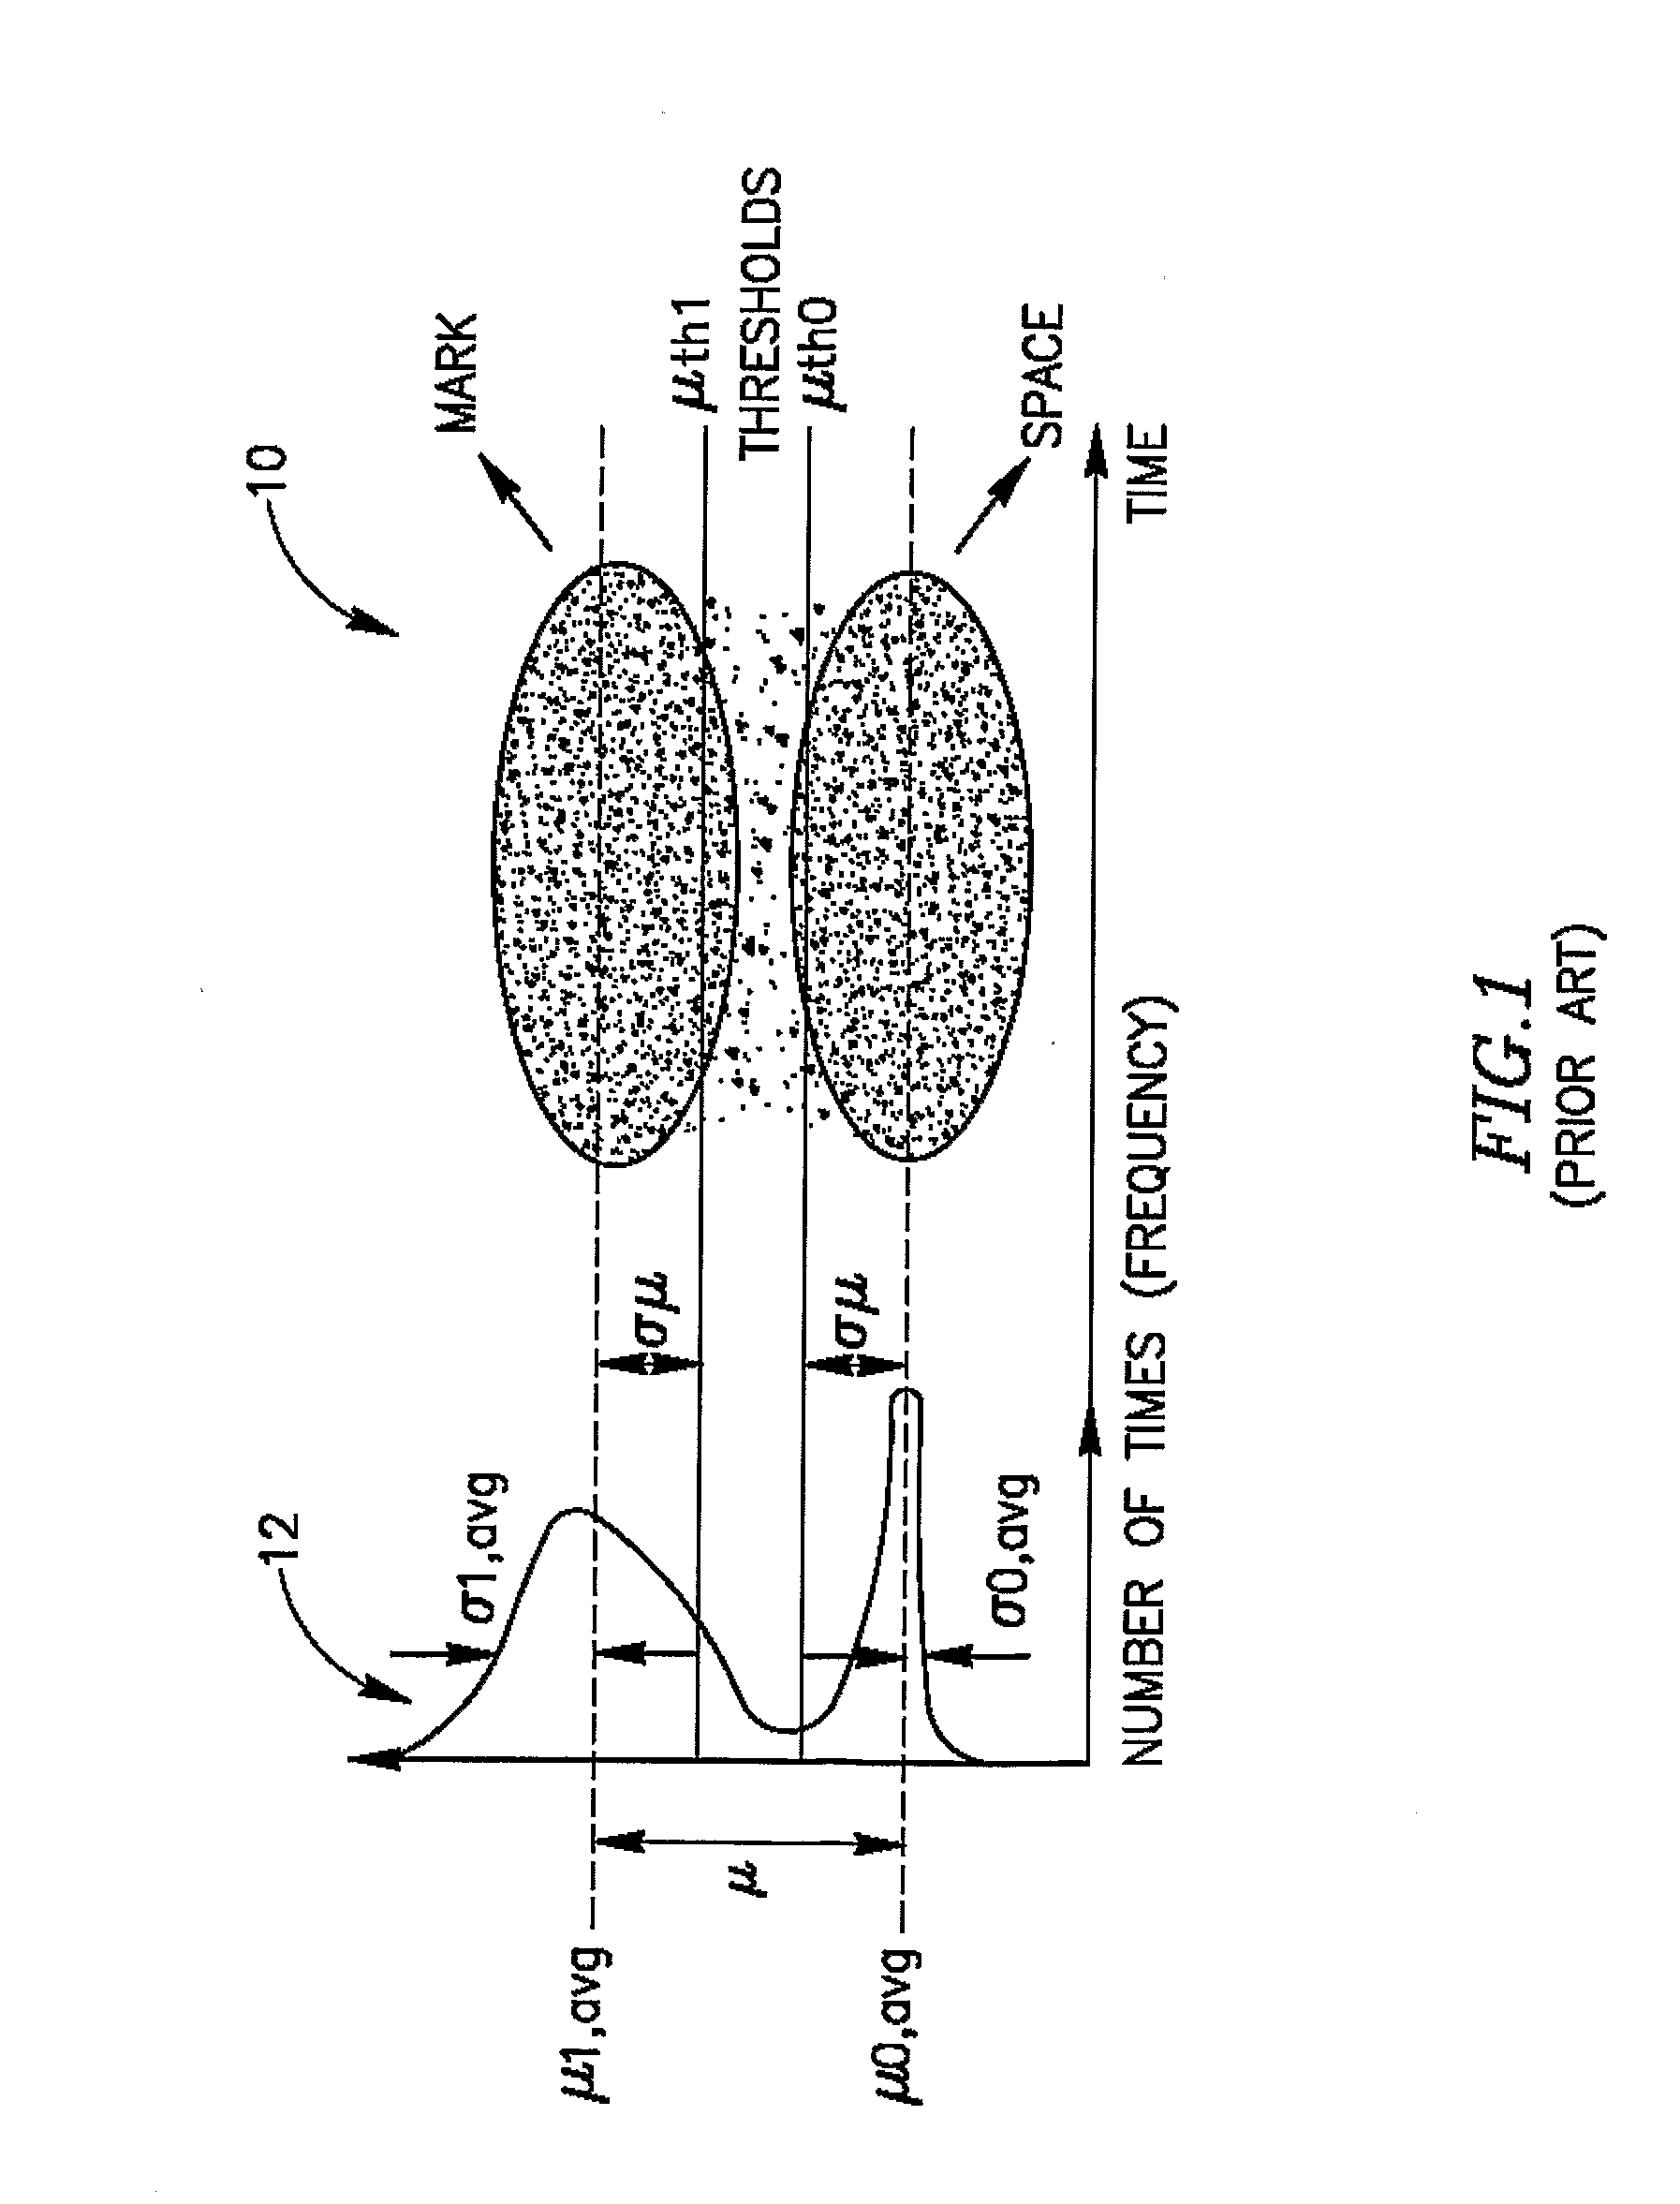 Method and System For Measuring Average Q-Factor in Optical Networks